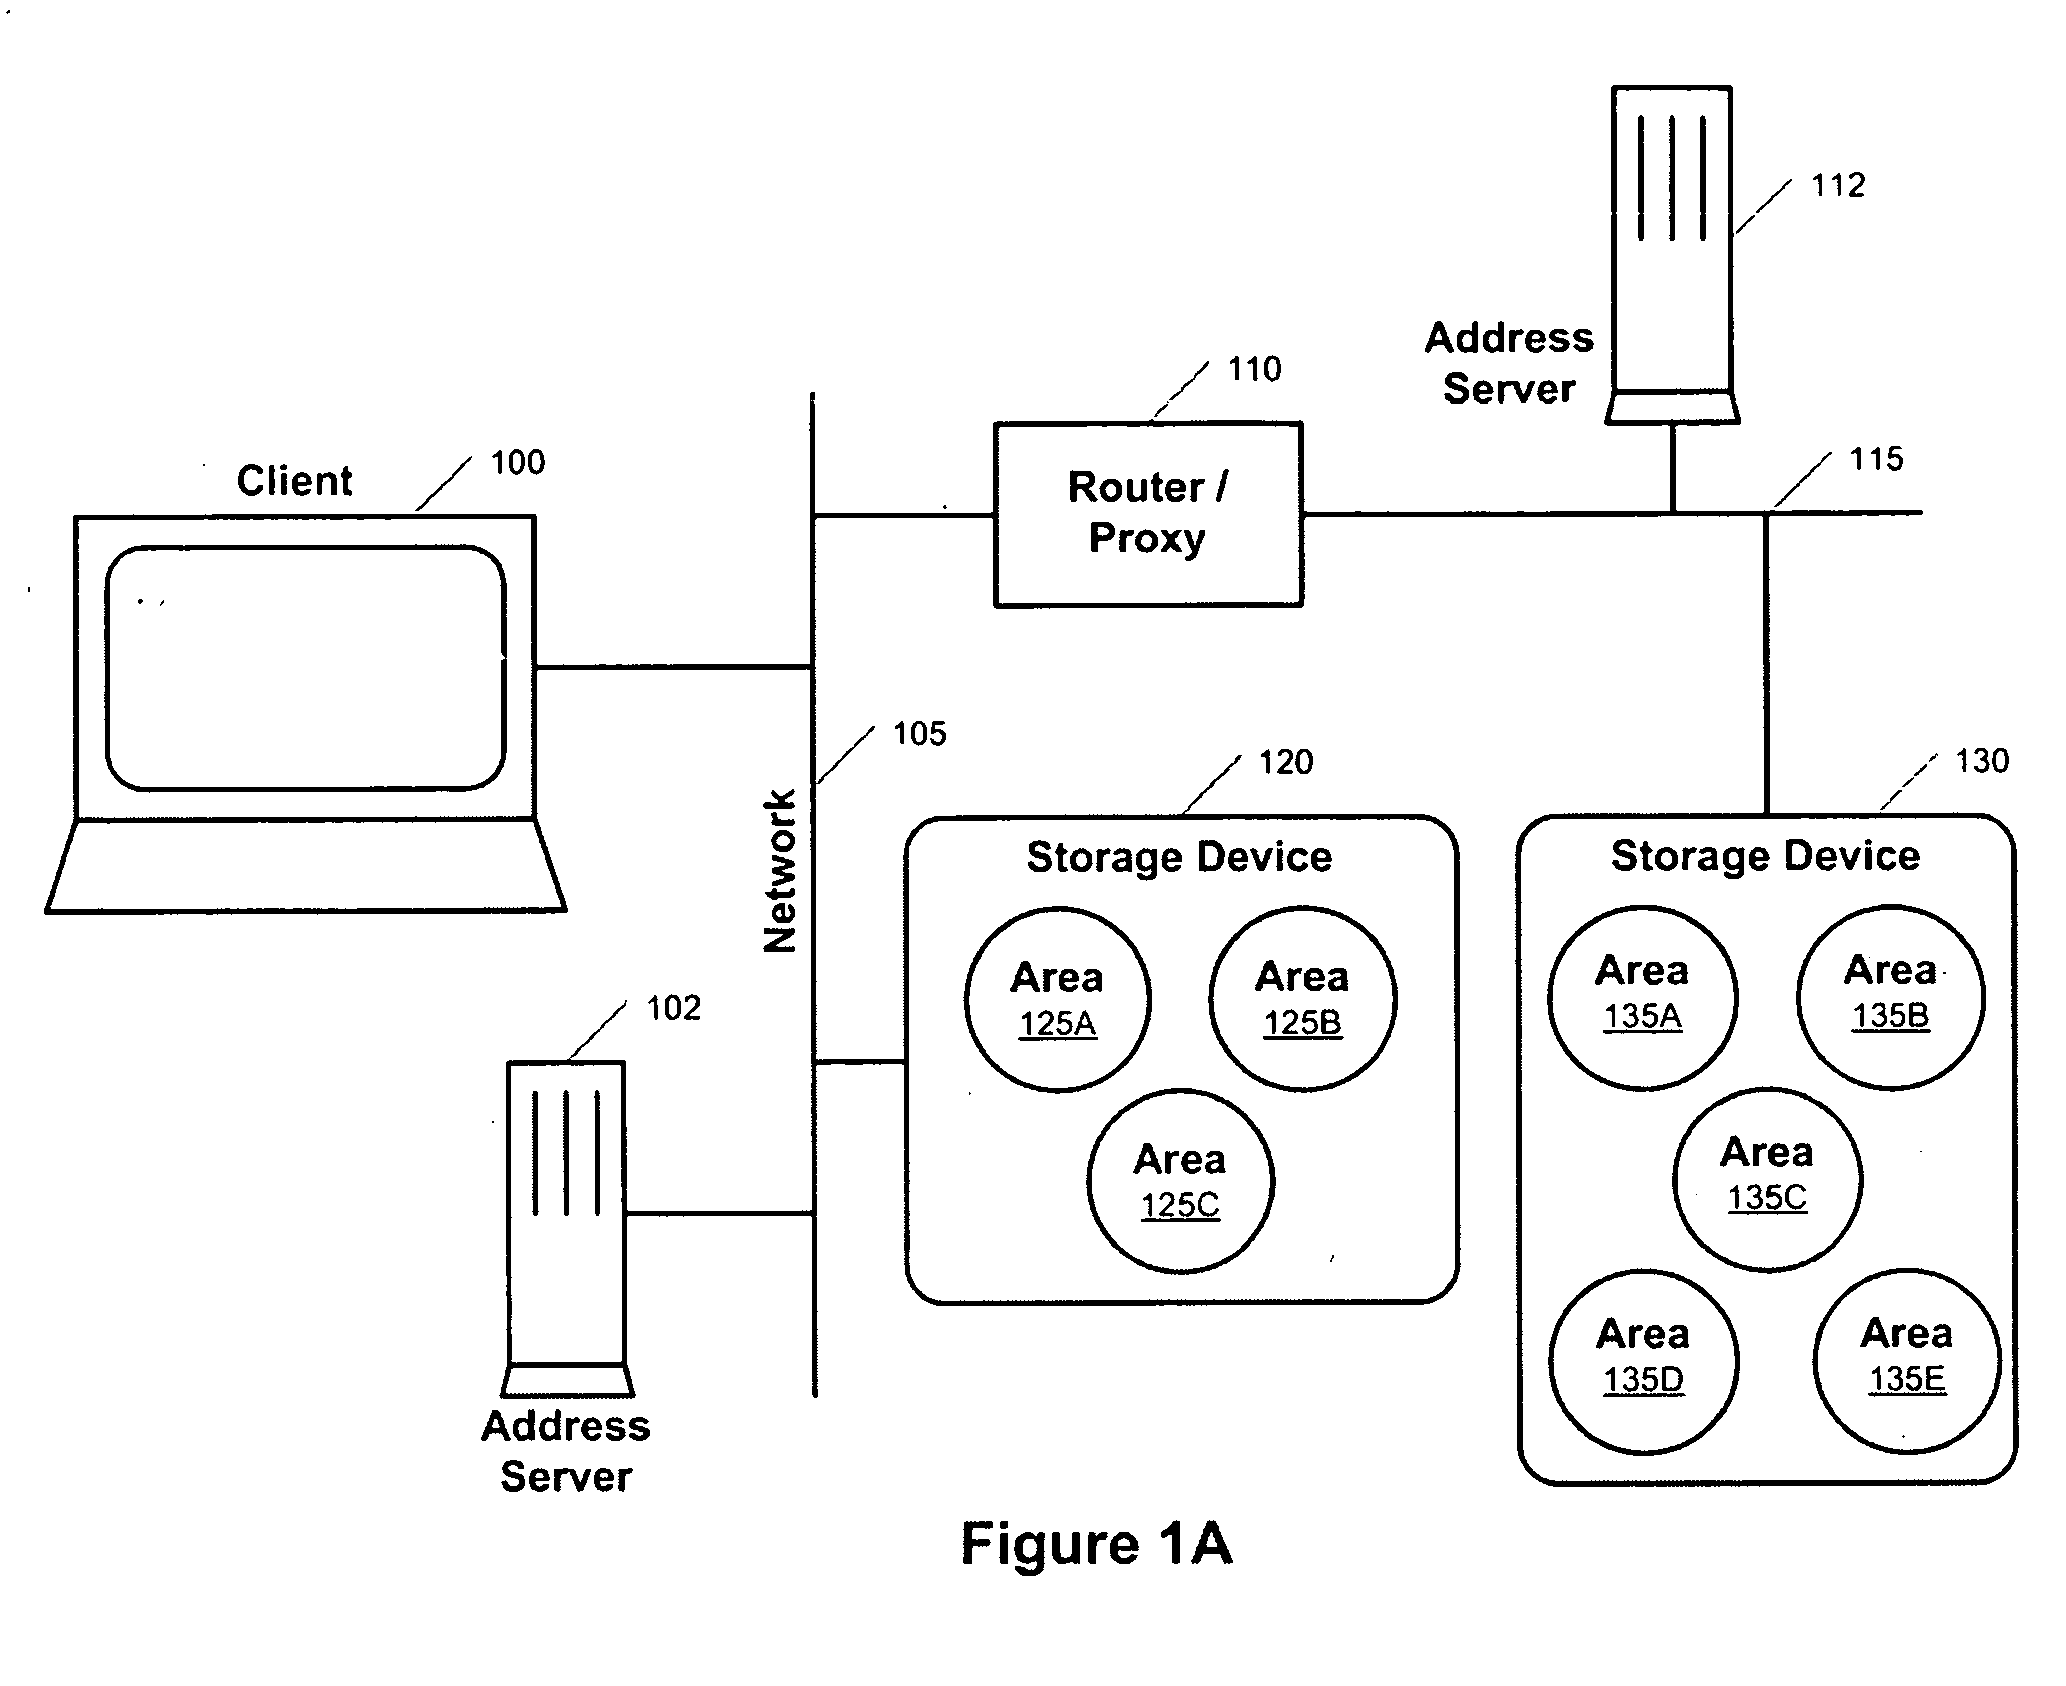 Systems and methods for deriving storage area commands